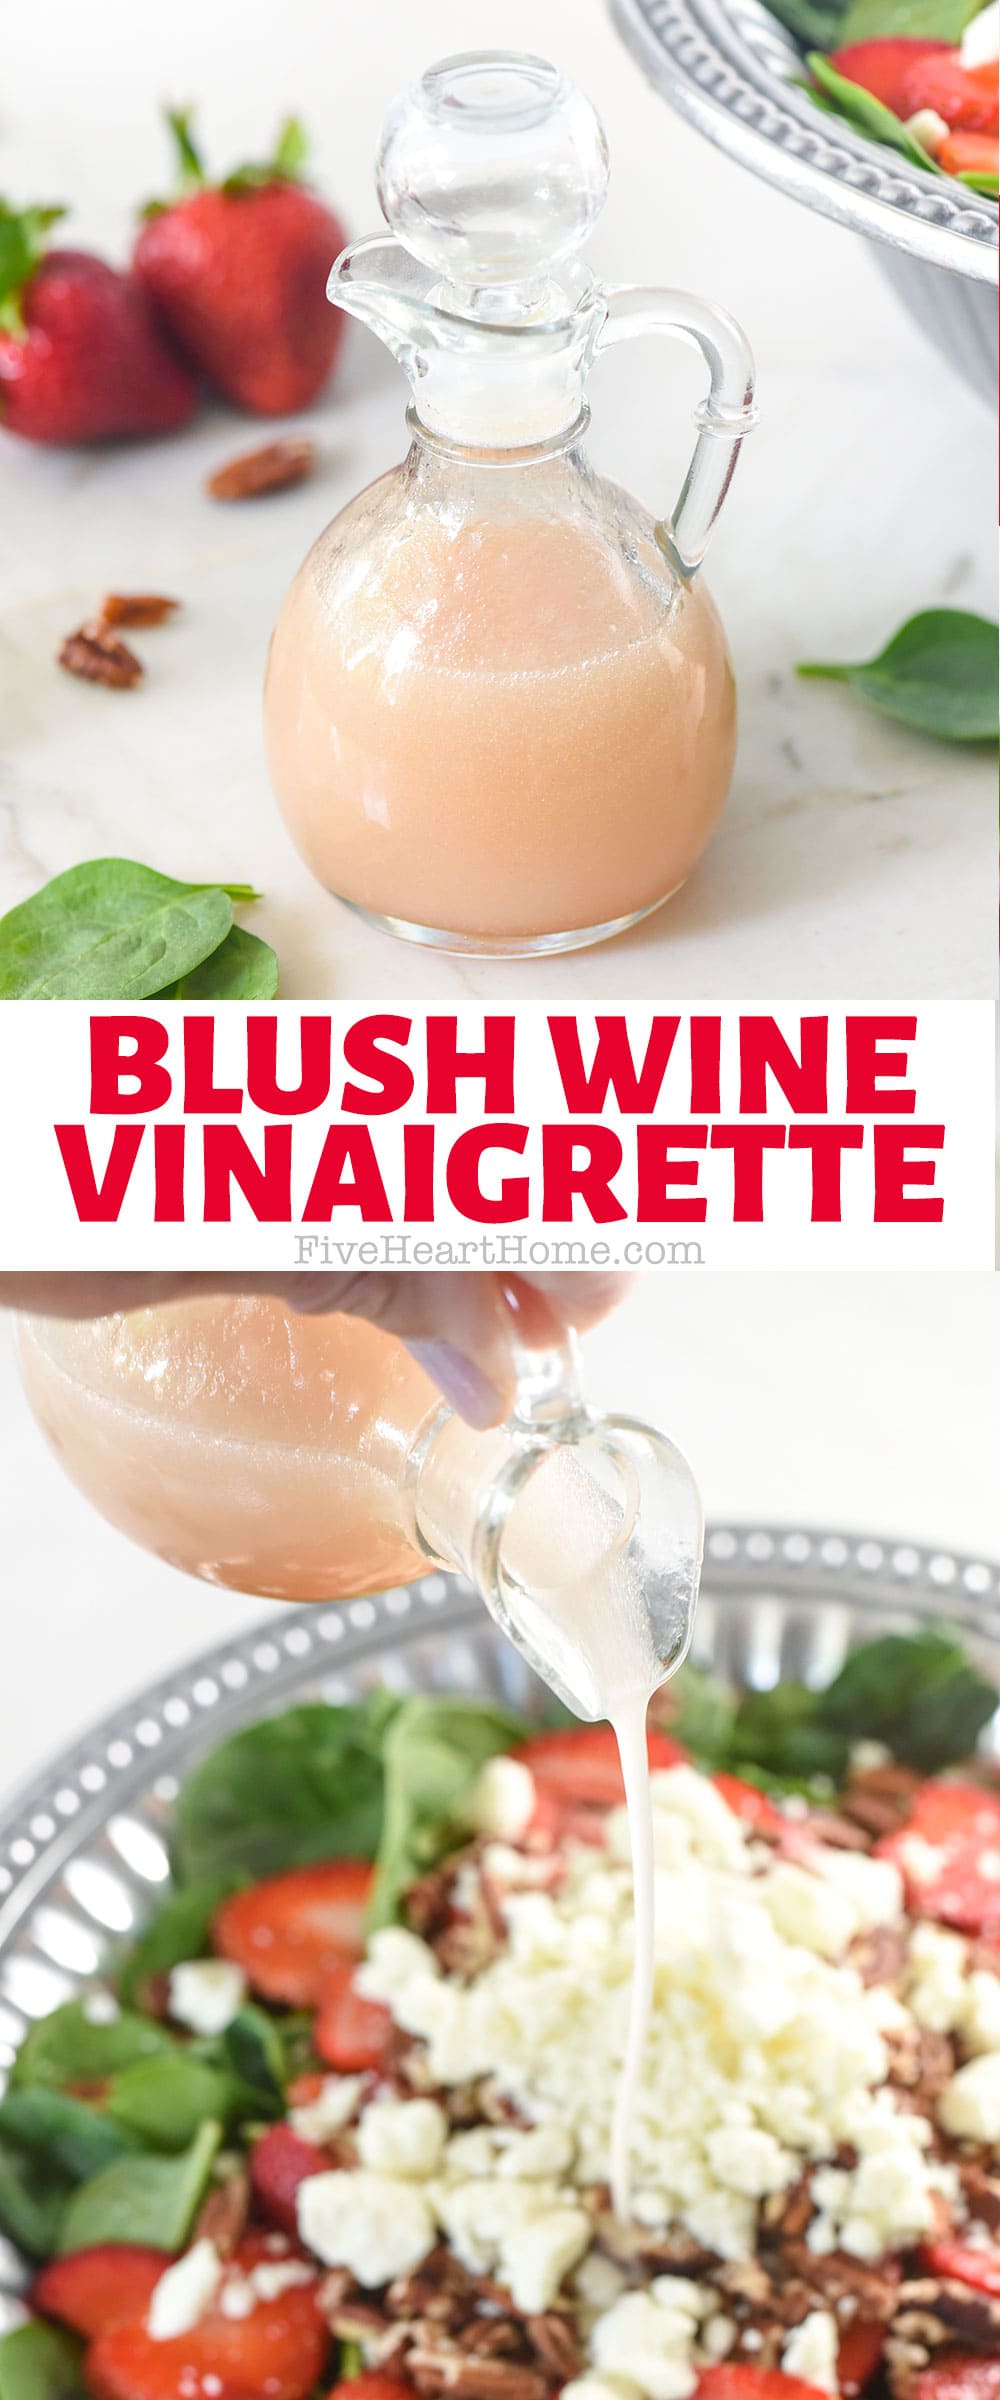 Blush Wine Vinaigrette ~ this light and lovely, sweet and tangy copycat recipe of Brianna’s Blush Wine Vinaigrette is delicious on fruit salads or green salads, and it’s the perfect dressing for strawberry spinach salad! | FiveHeartHome.com via @fivehearthome